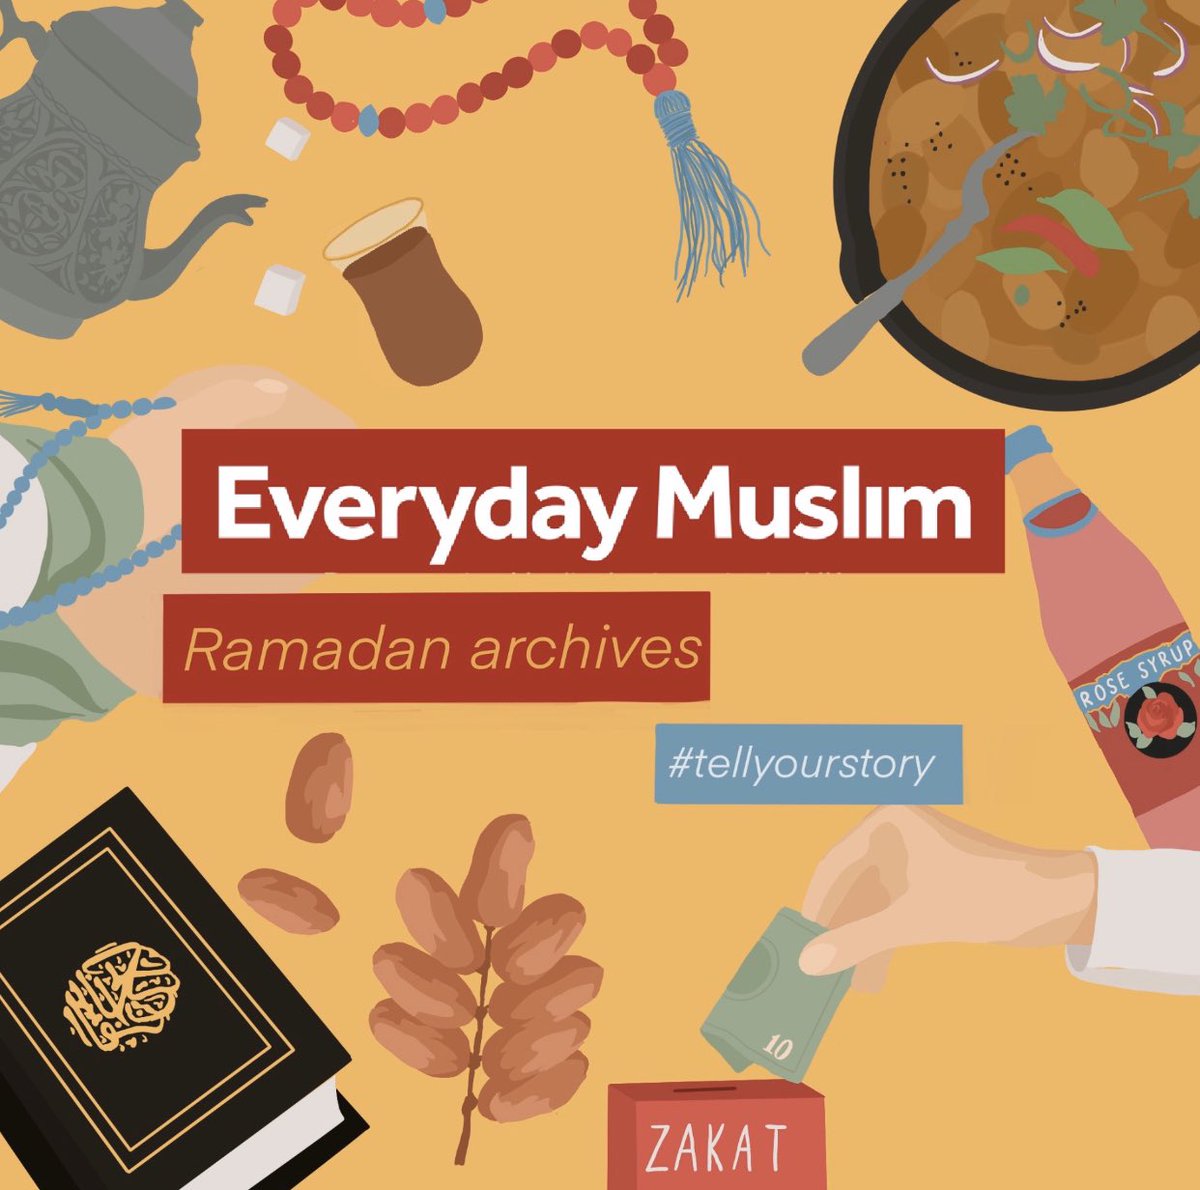  #journorequest or a  #requestfromjournos have you been covering  #Ramadan    #RamadanAtHome  #RamadanLockdown We are collecting these & other stories of Muslim experiences for a new archive collection. If you would like to contribute articles, research or add other stories Pls DM/Share